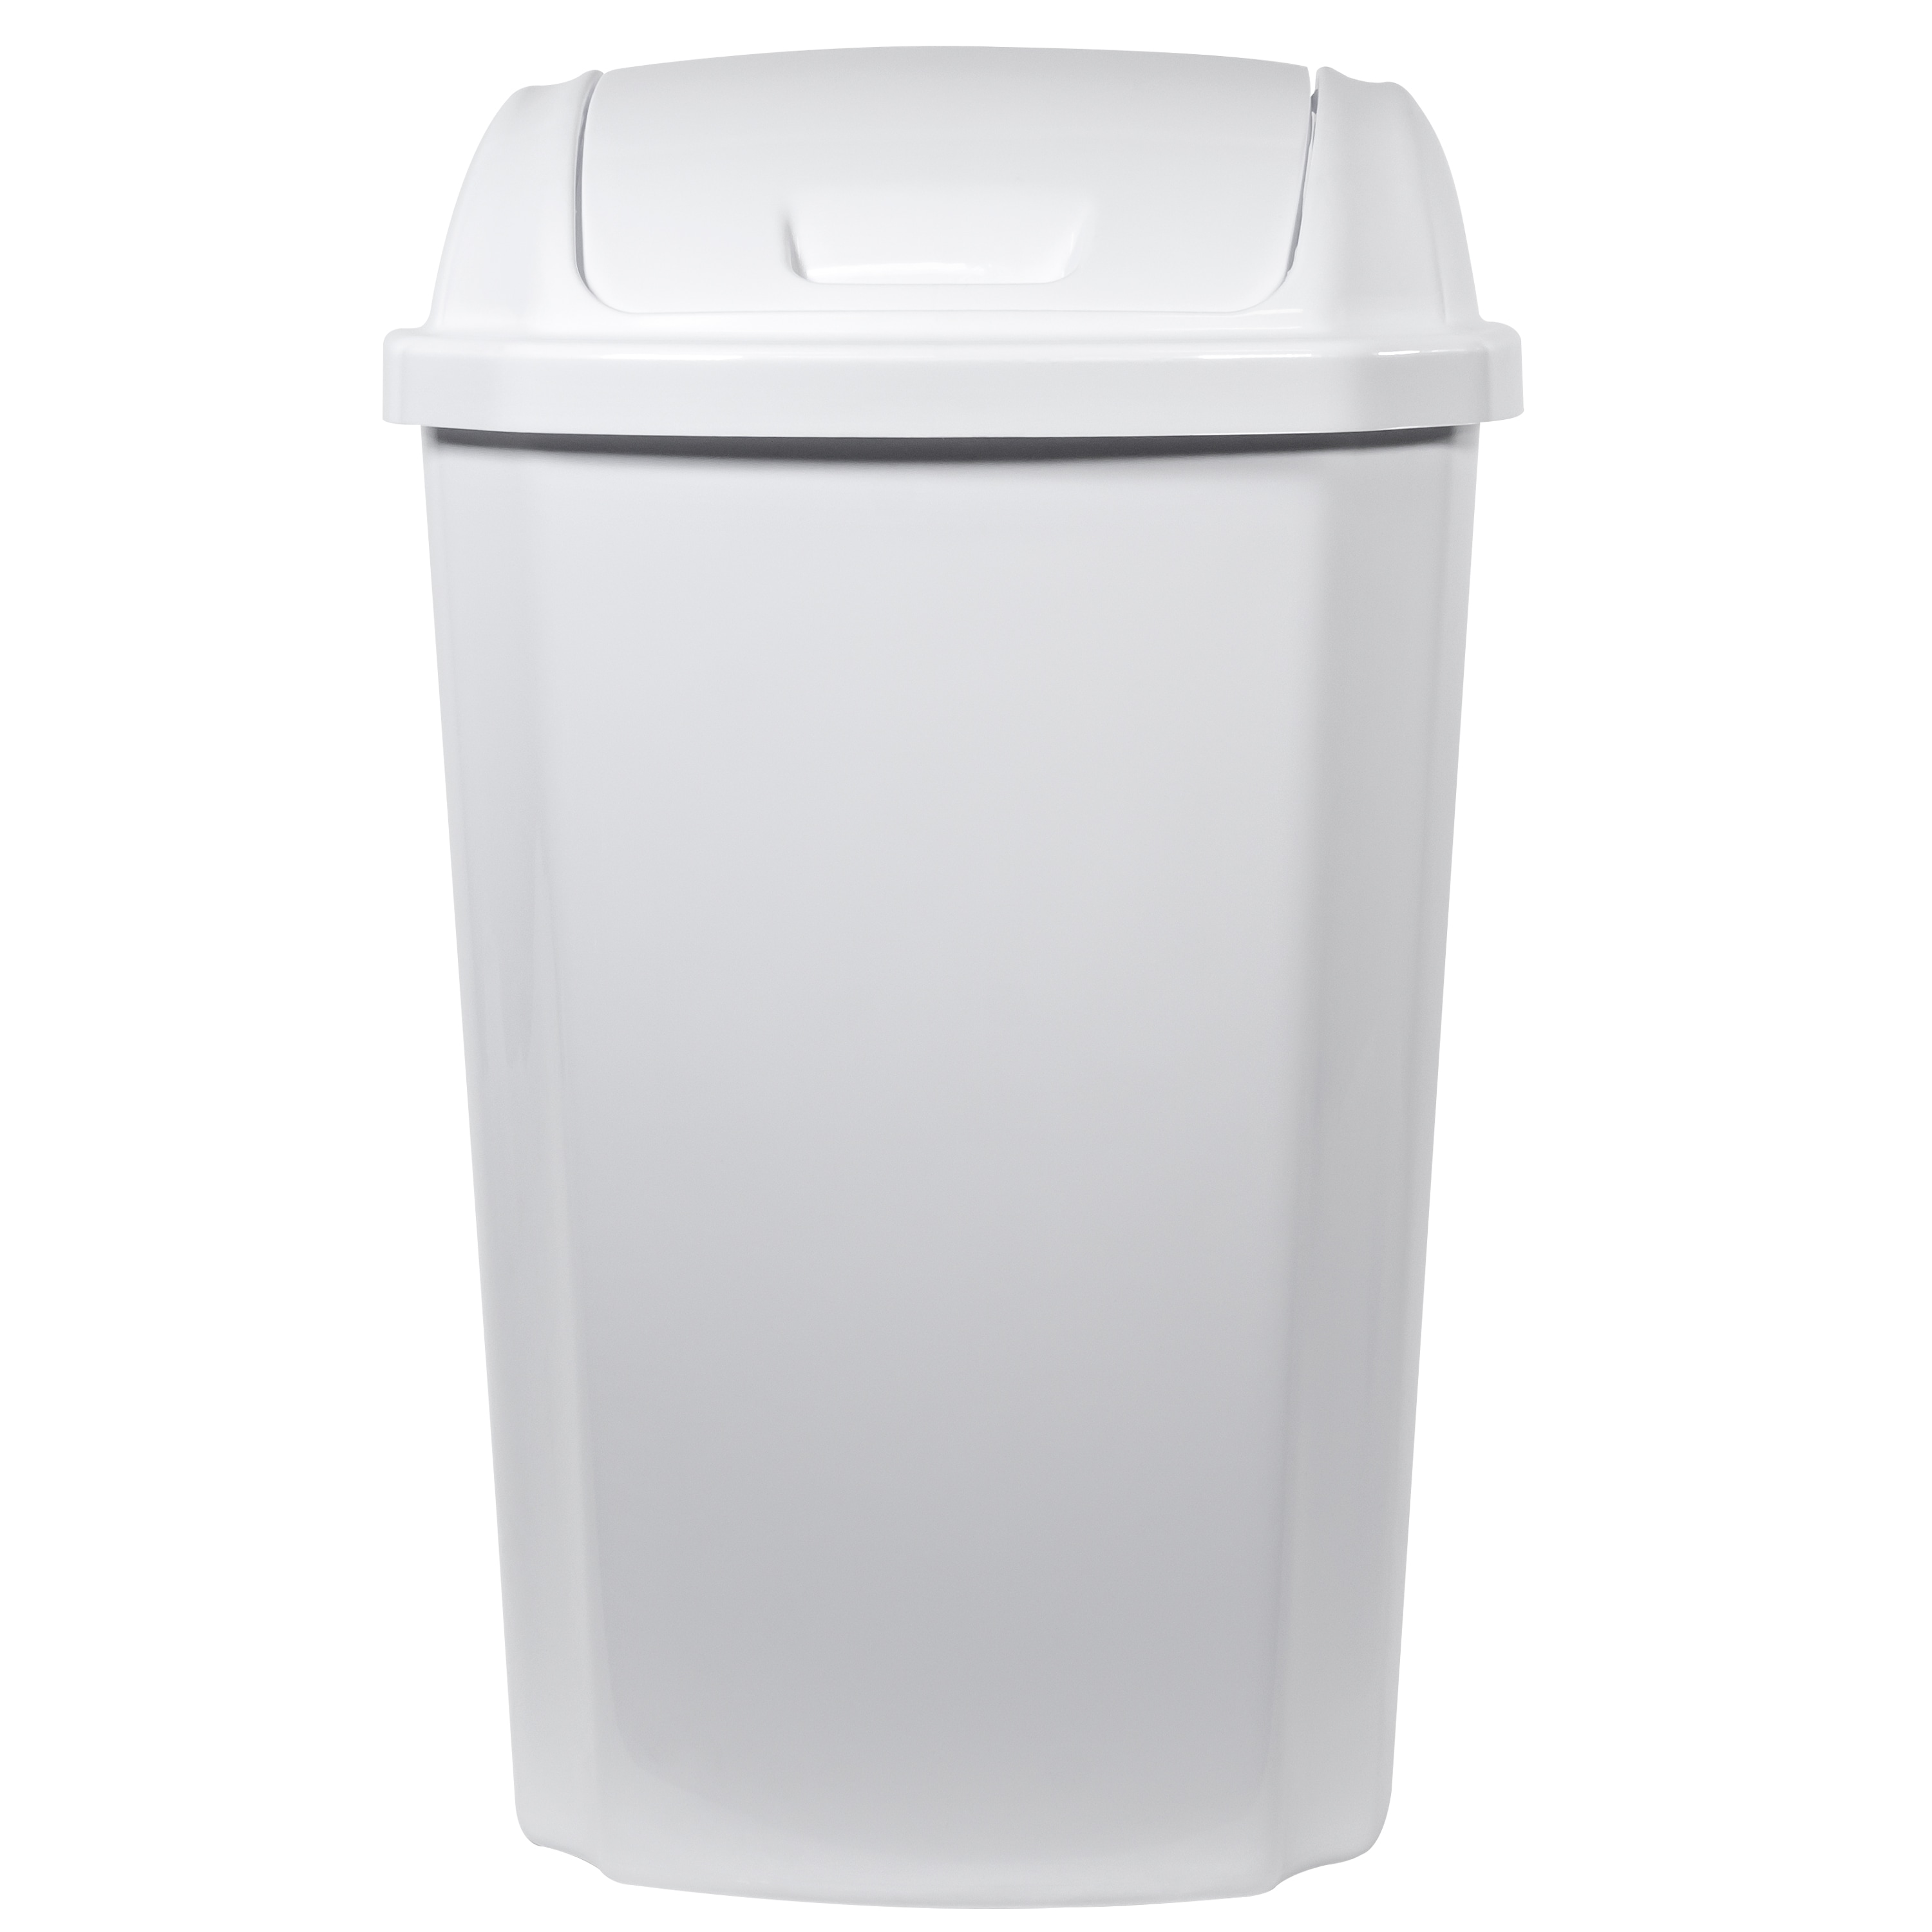 35 Gallon Black Square Trash Can No Lid Heavy Duty Plastic Durable Resin Smooth 